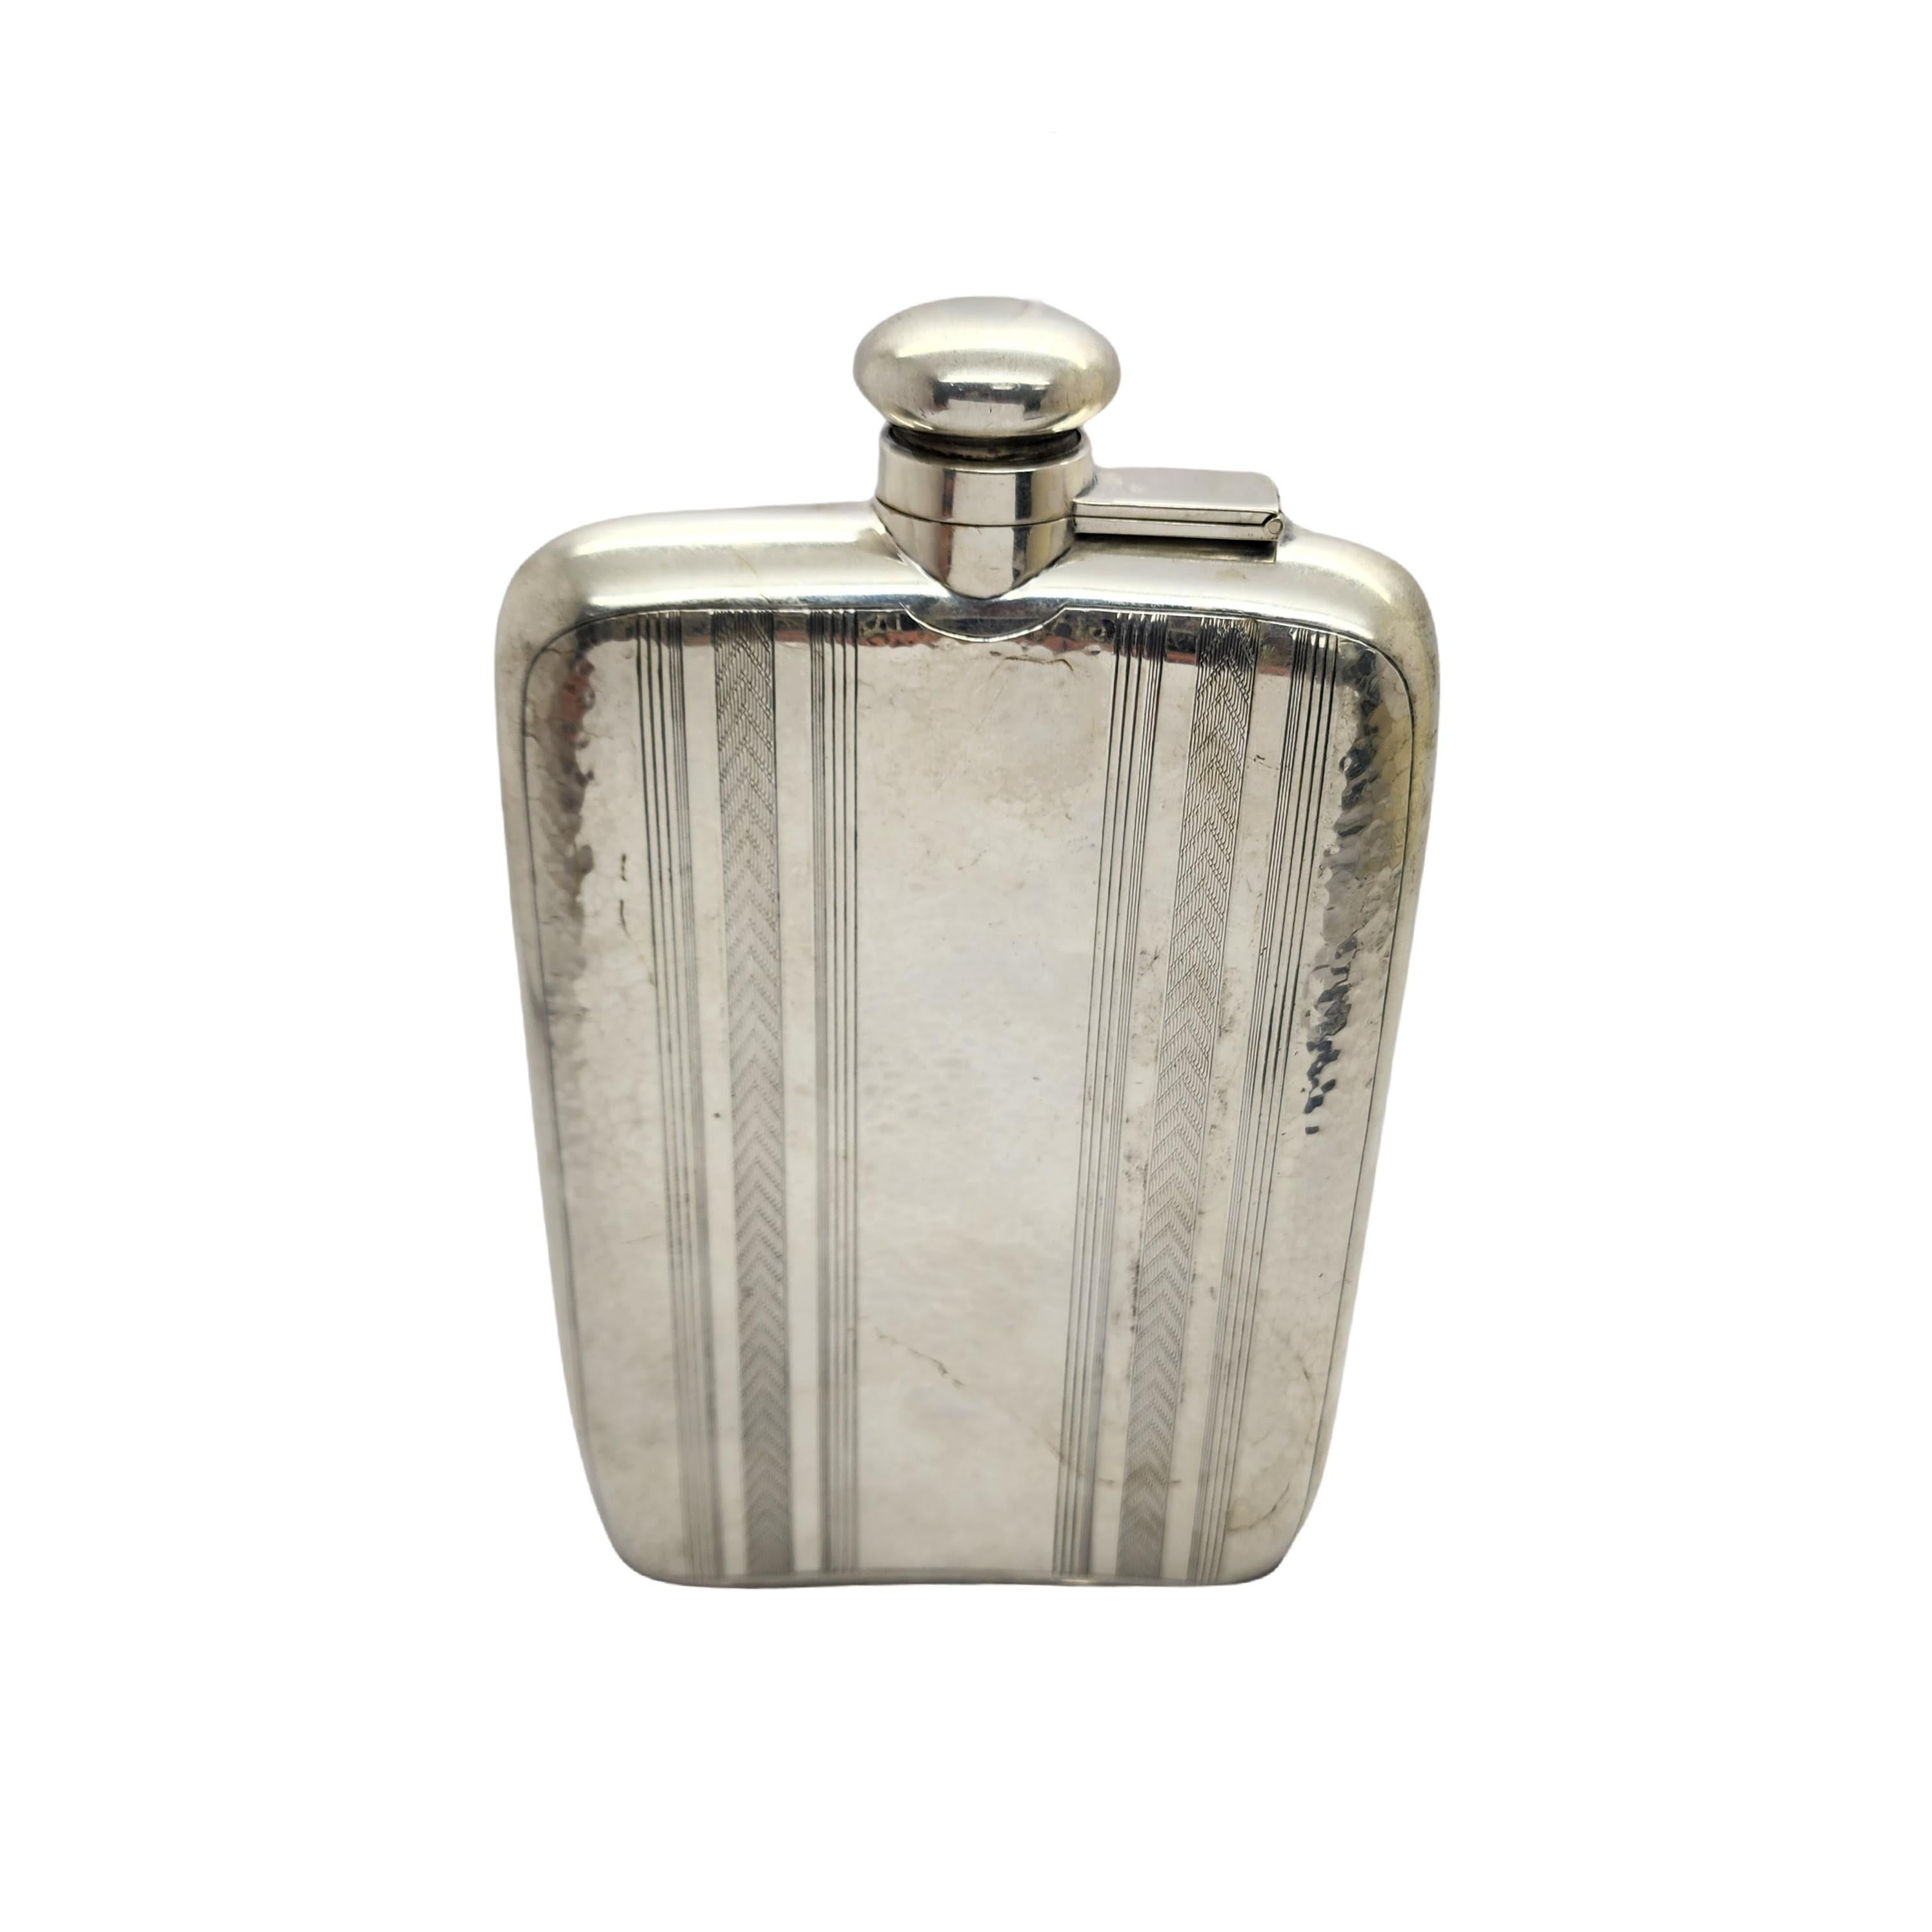 Sterling silver hip flask by R. Blackinton & Co with monogram.

Monogram appears to be BRS

Beautiful curved hip flask featuring a hammered finish with striped and V design stripes, and a screw top with original inner cork. Hold 3/4 pint.

Measures